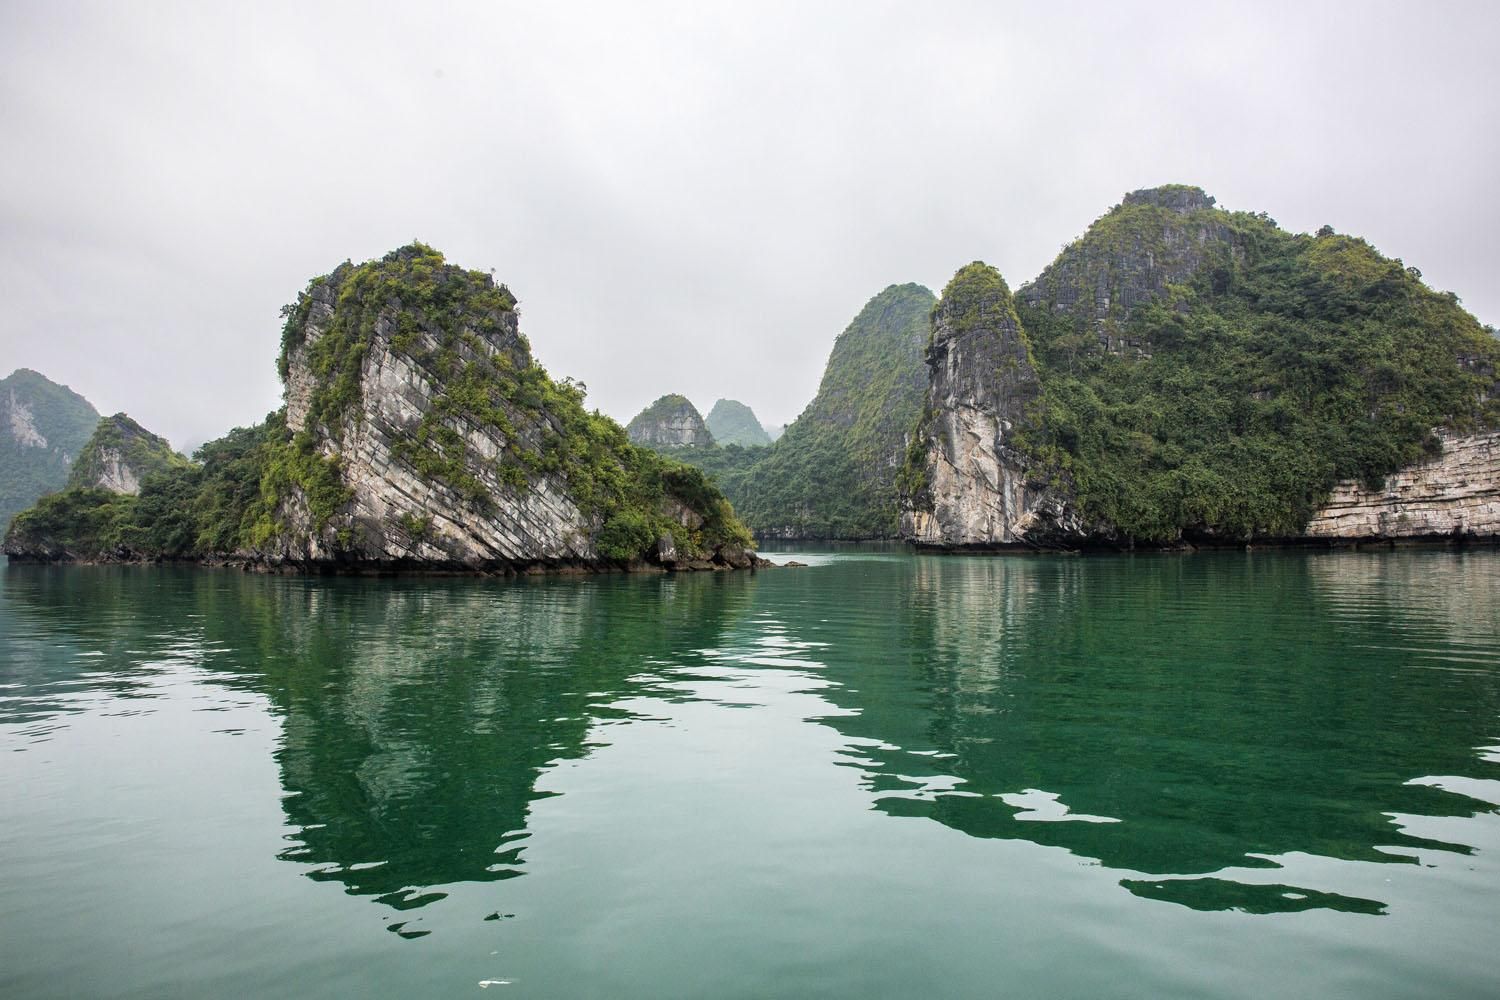 Halong Bay on a Cloudy Day